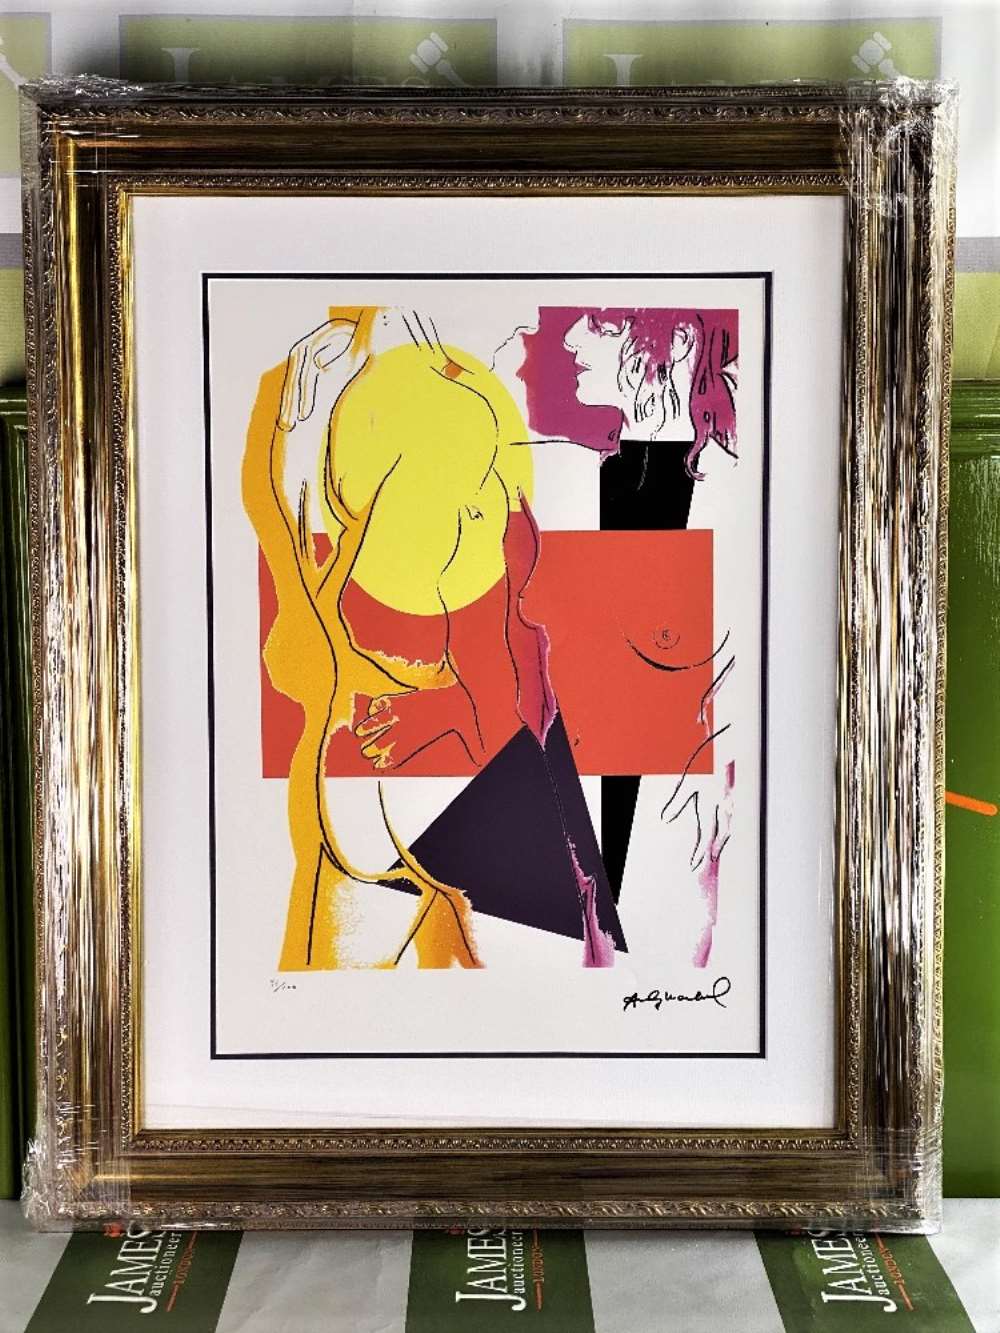 Andy Warhol &#8211; (1928-1987) &#8220;Lovers&#8221; Lithograph #91/100 - Image 2 of 5